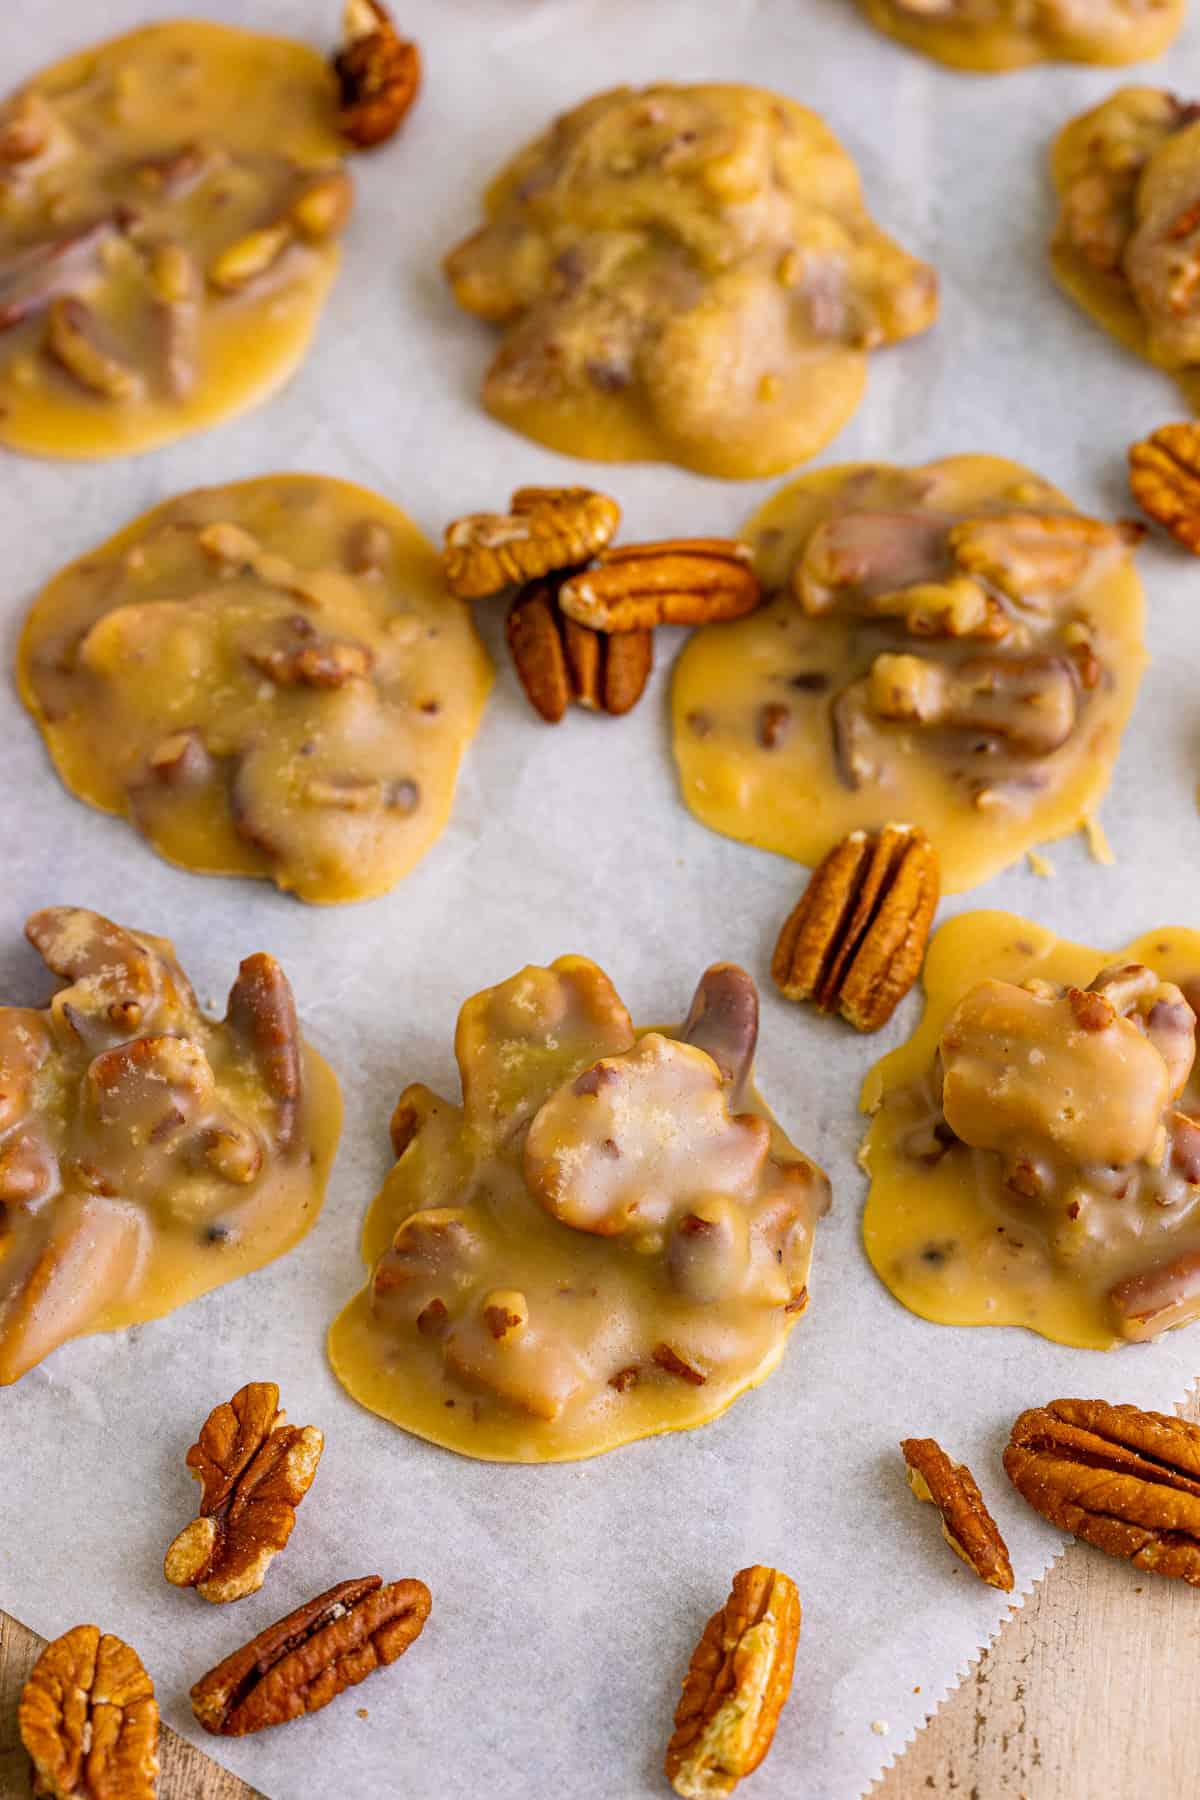 Southern pralines and pecans on parchment paper.